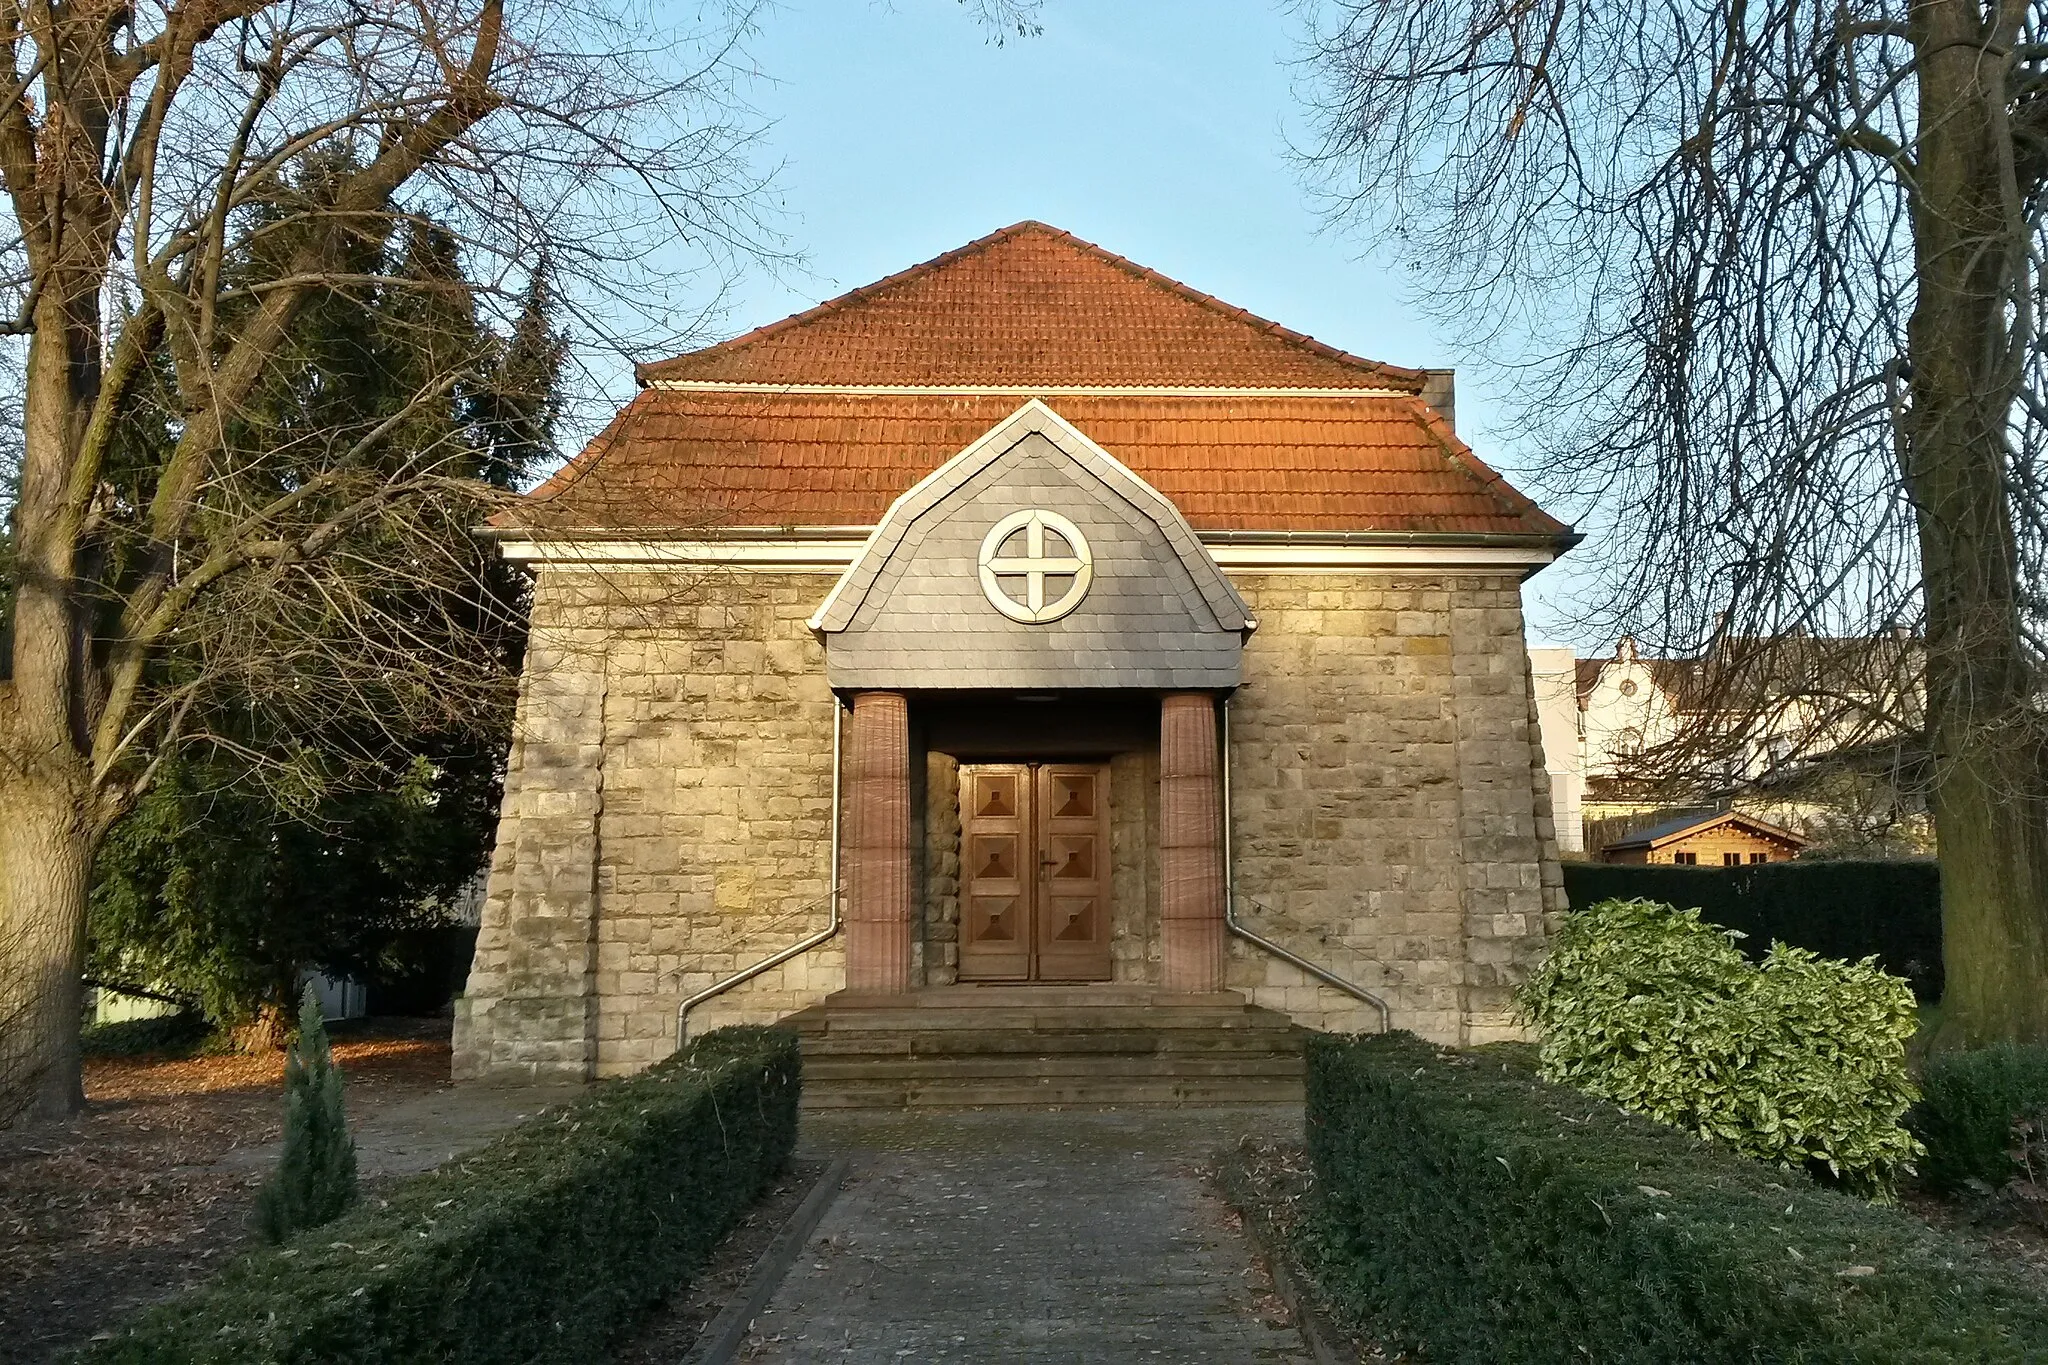 Photo showing: Free Religious Ordination Hall in Ober-Ingelheim, Mühlstraße 41, built for the German Catholic community, art nouveau building with porch, 1910, architect Otto Schmidt, Wiesbaden